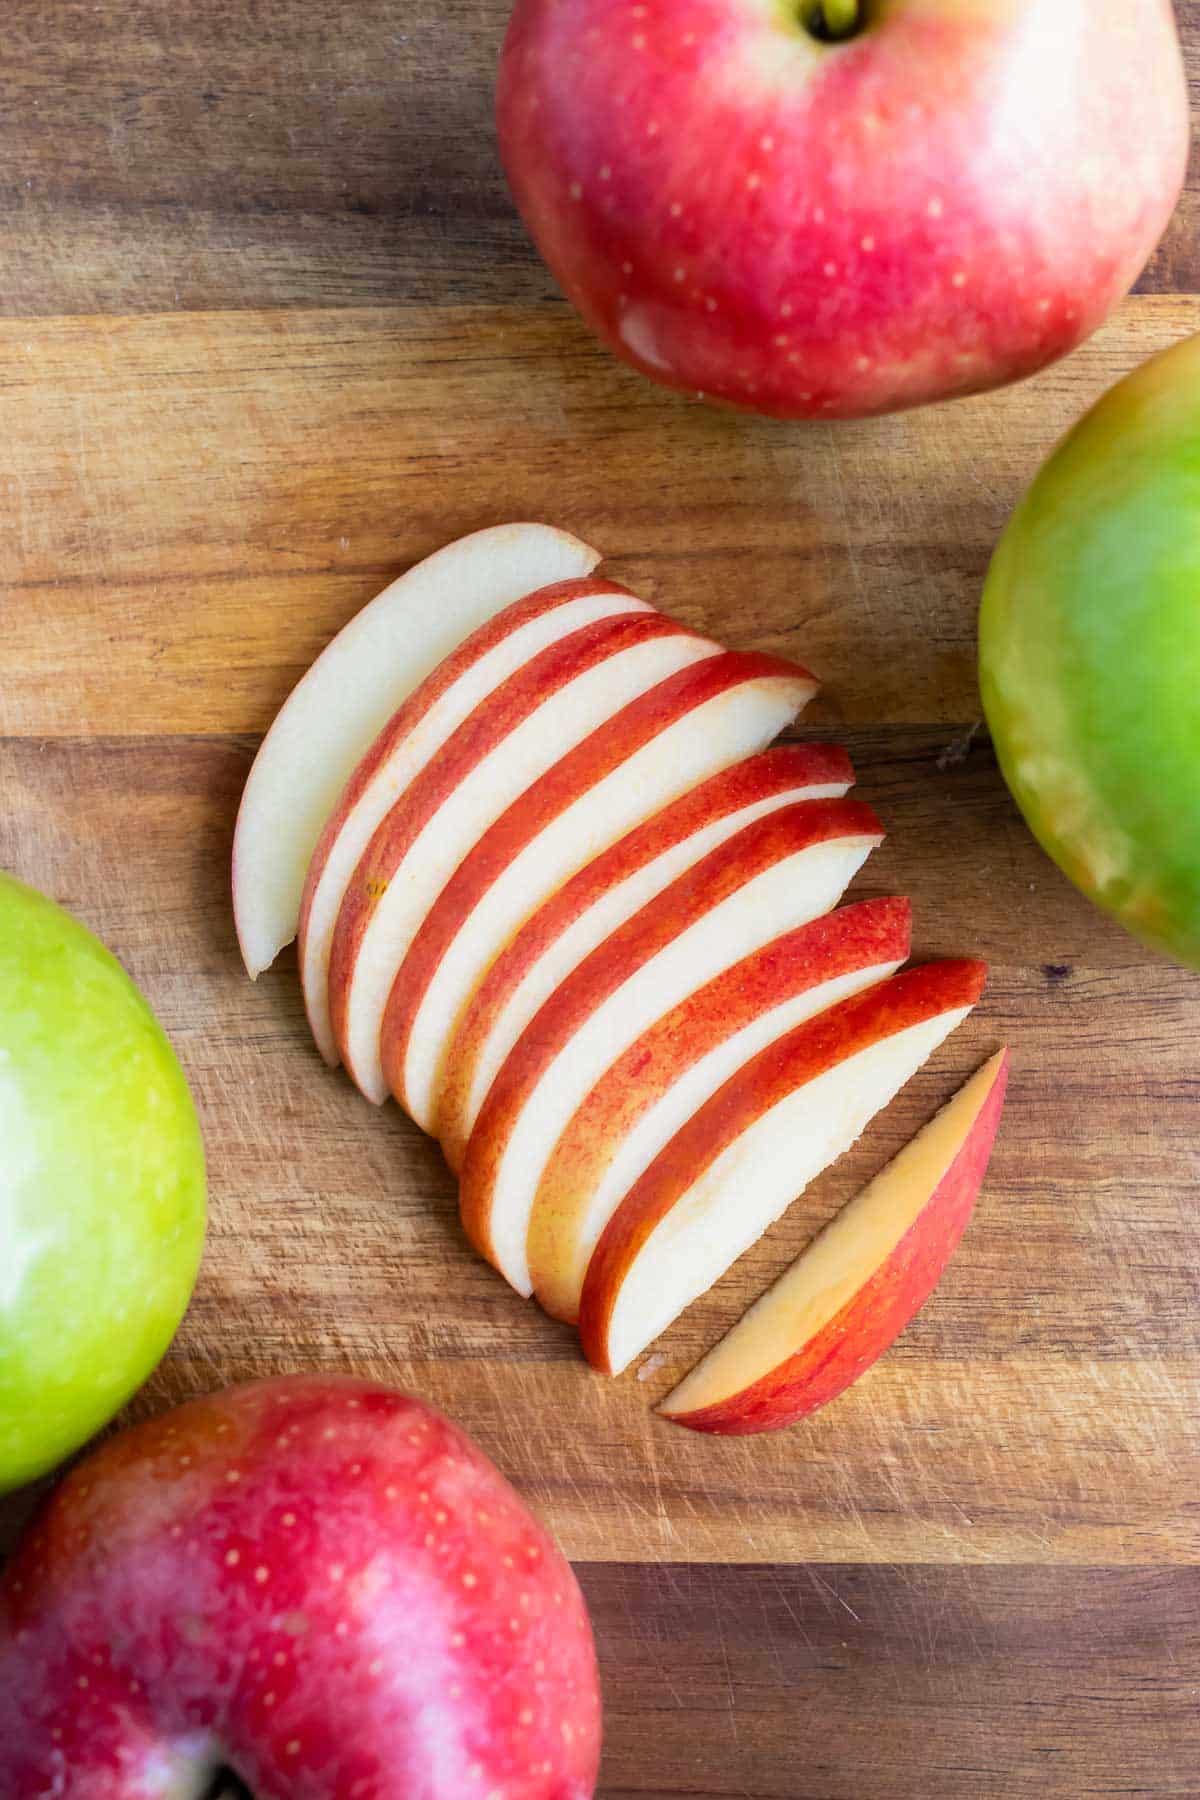 How To Cut Pretty Apple Slices